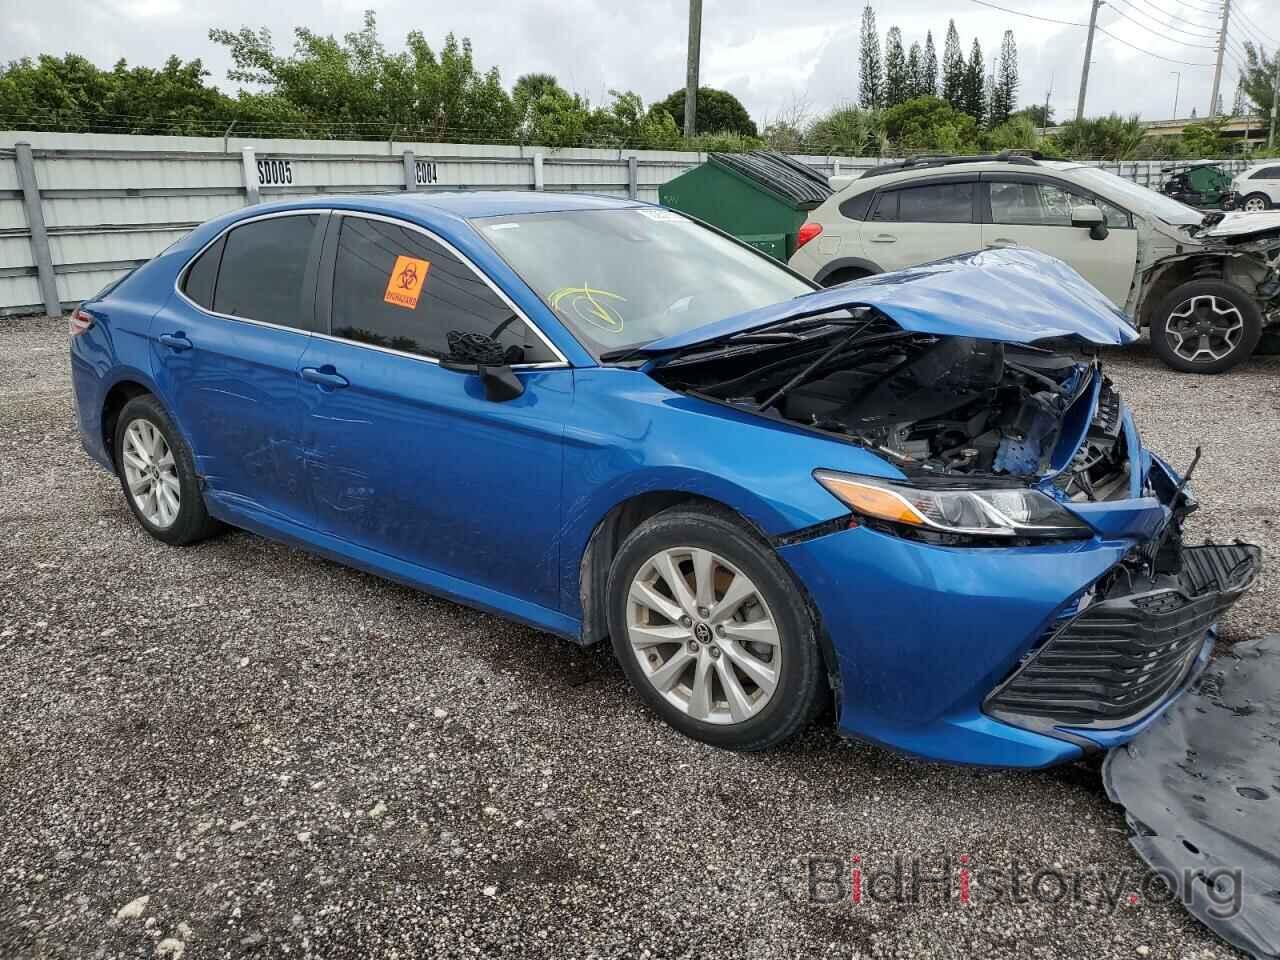 Report 4T1C11AK5LU388660 TOYOTA CAMRY 2020 BLUE GAS - price and damage ...